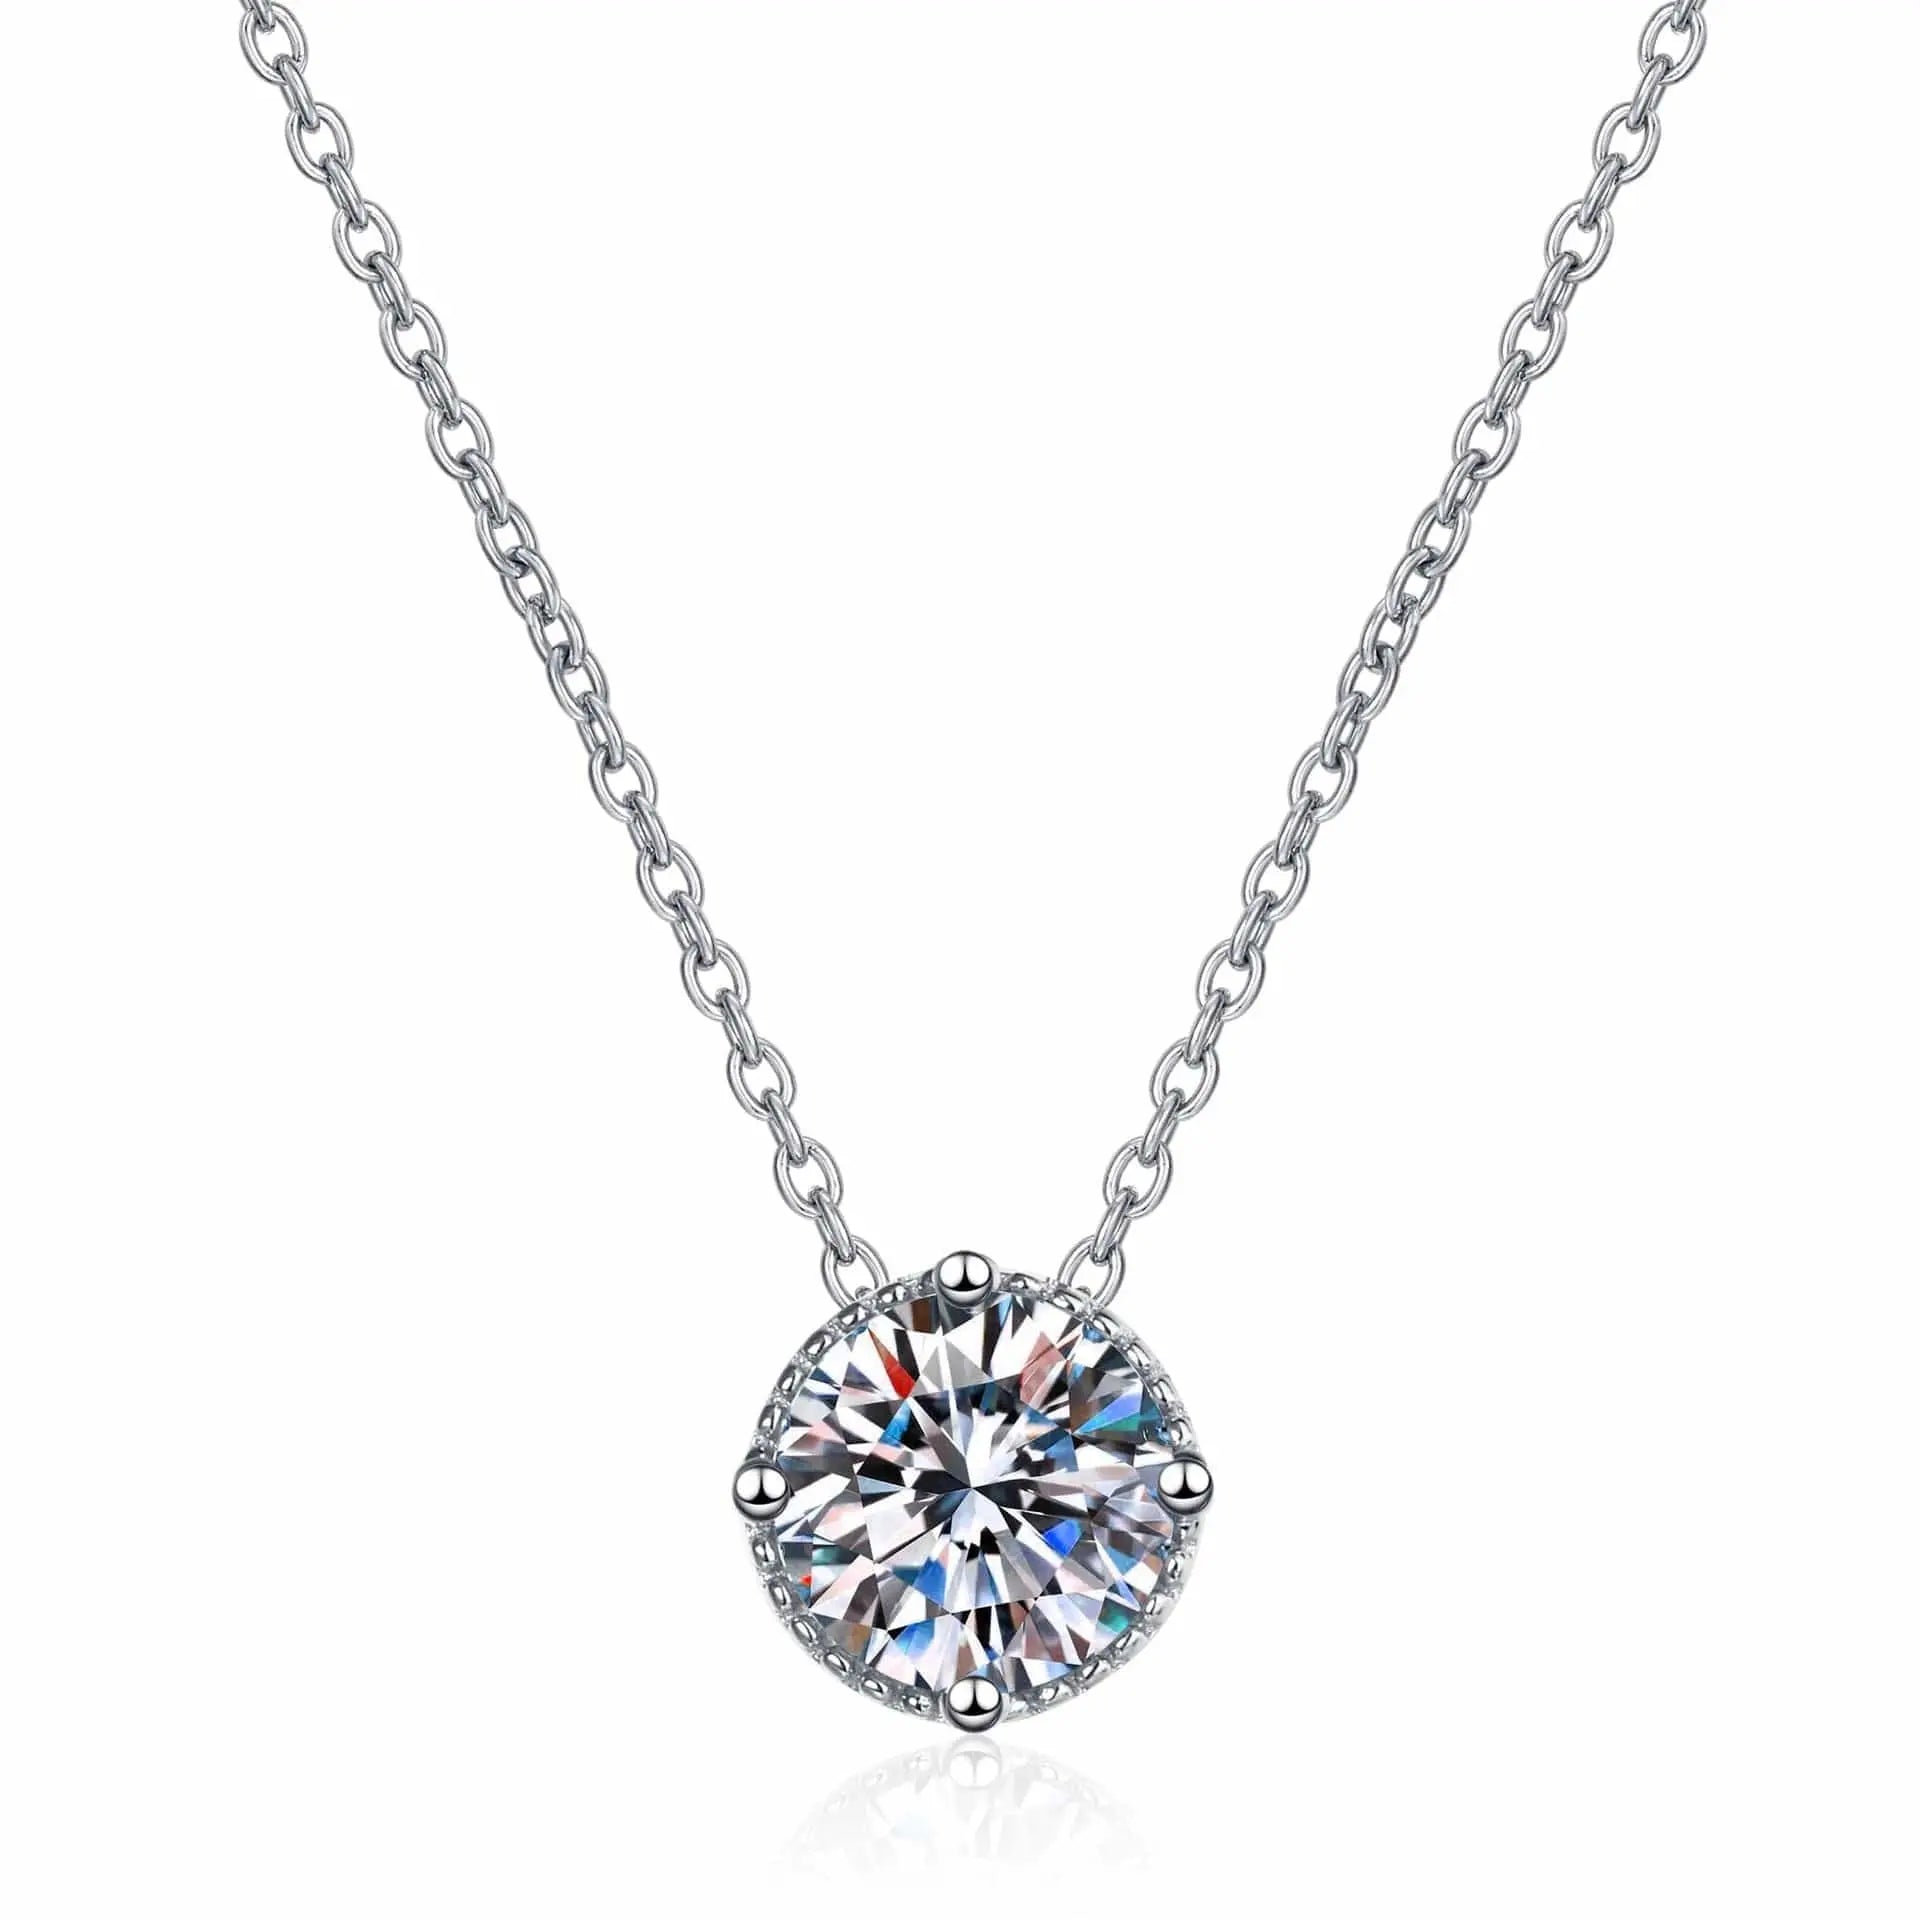 Sterling Silver Necklace with Round Cut F Color Moissanite Stone